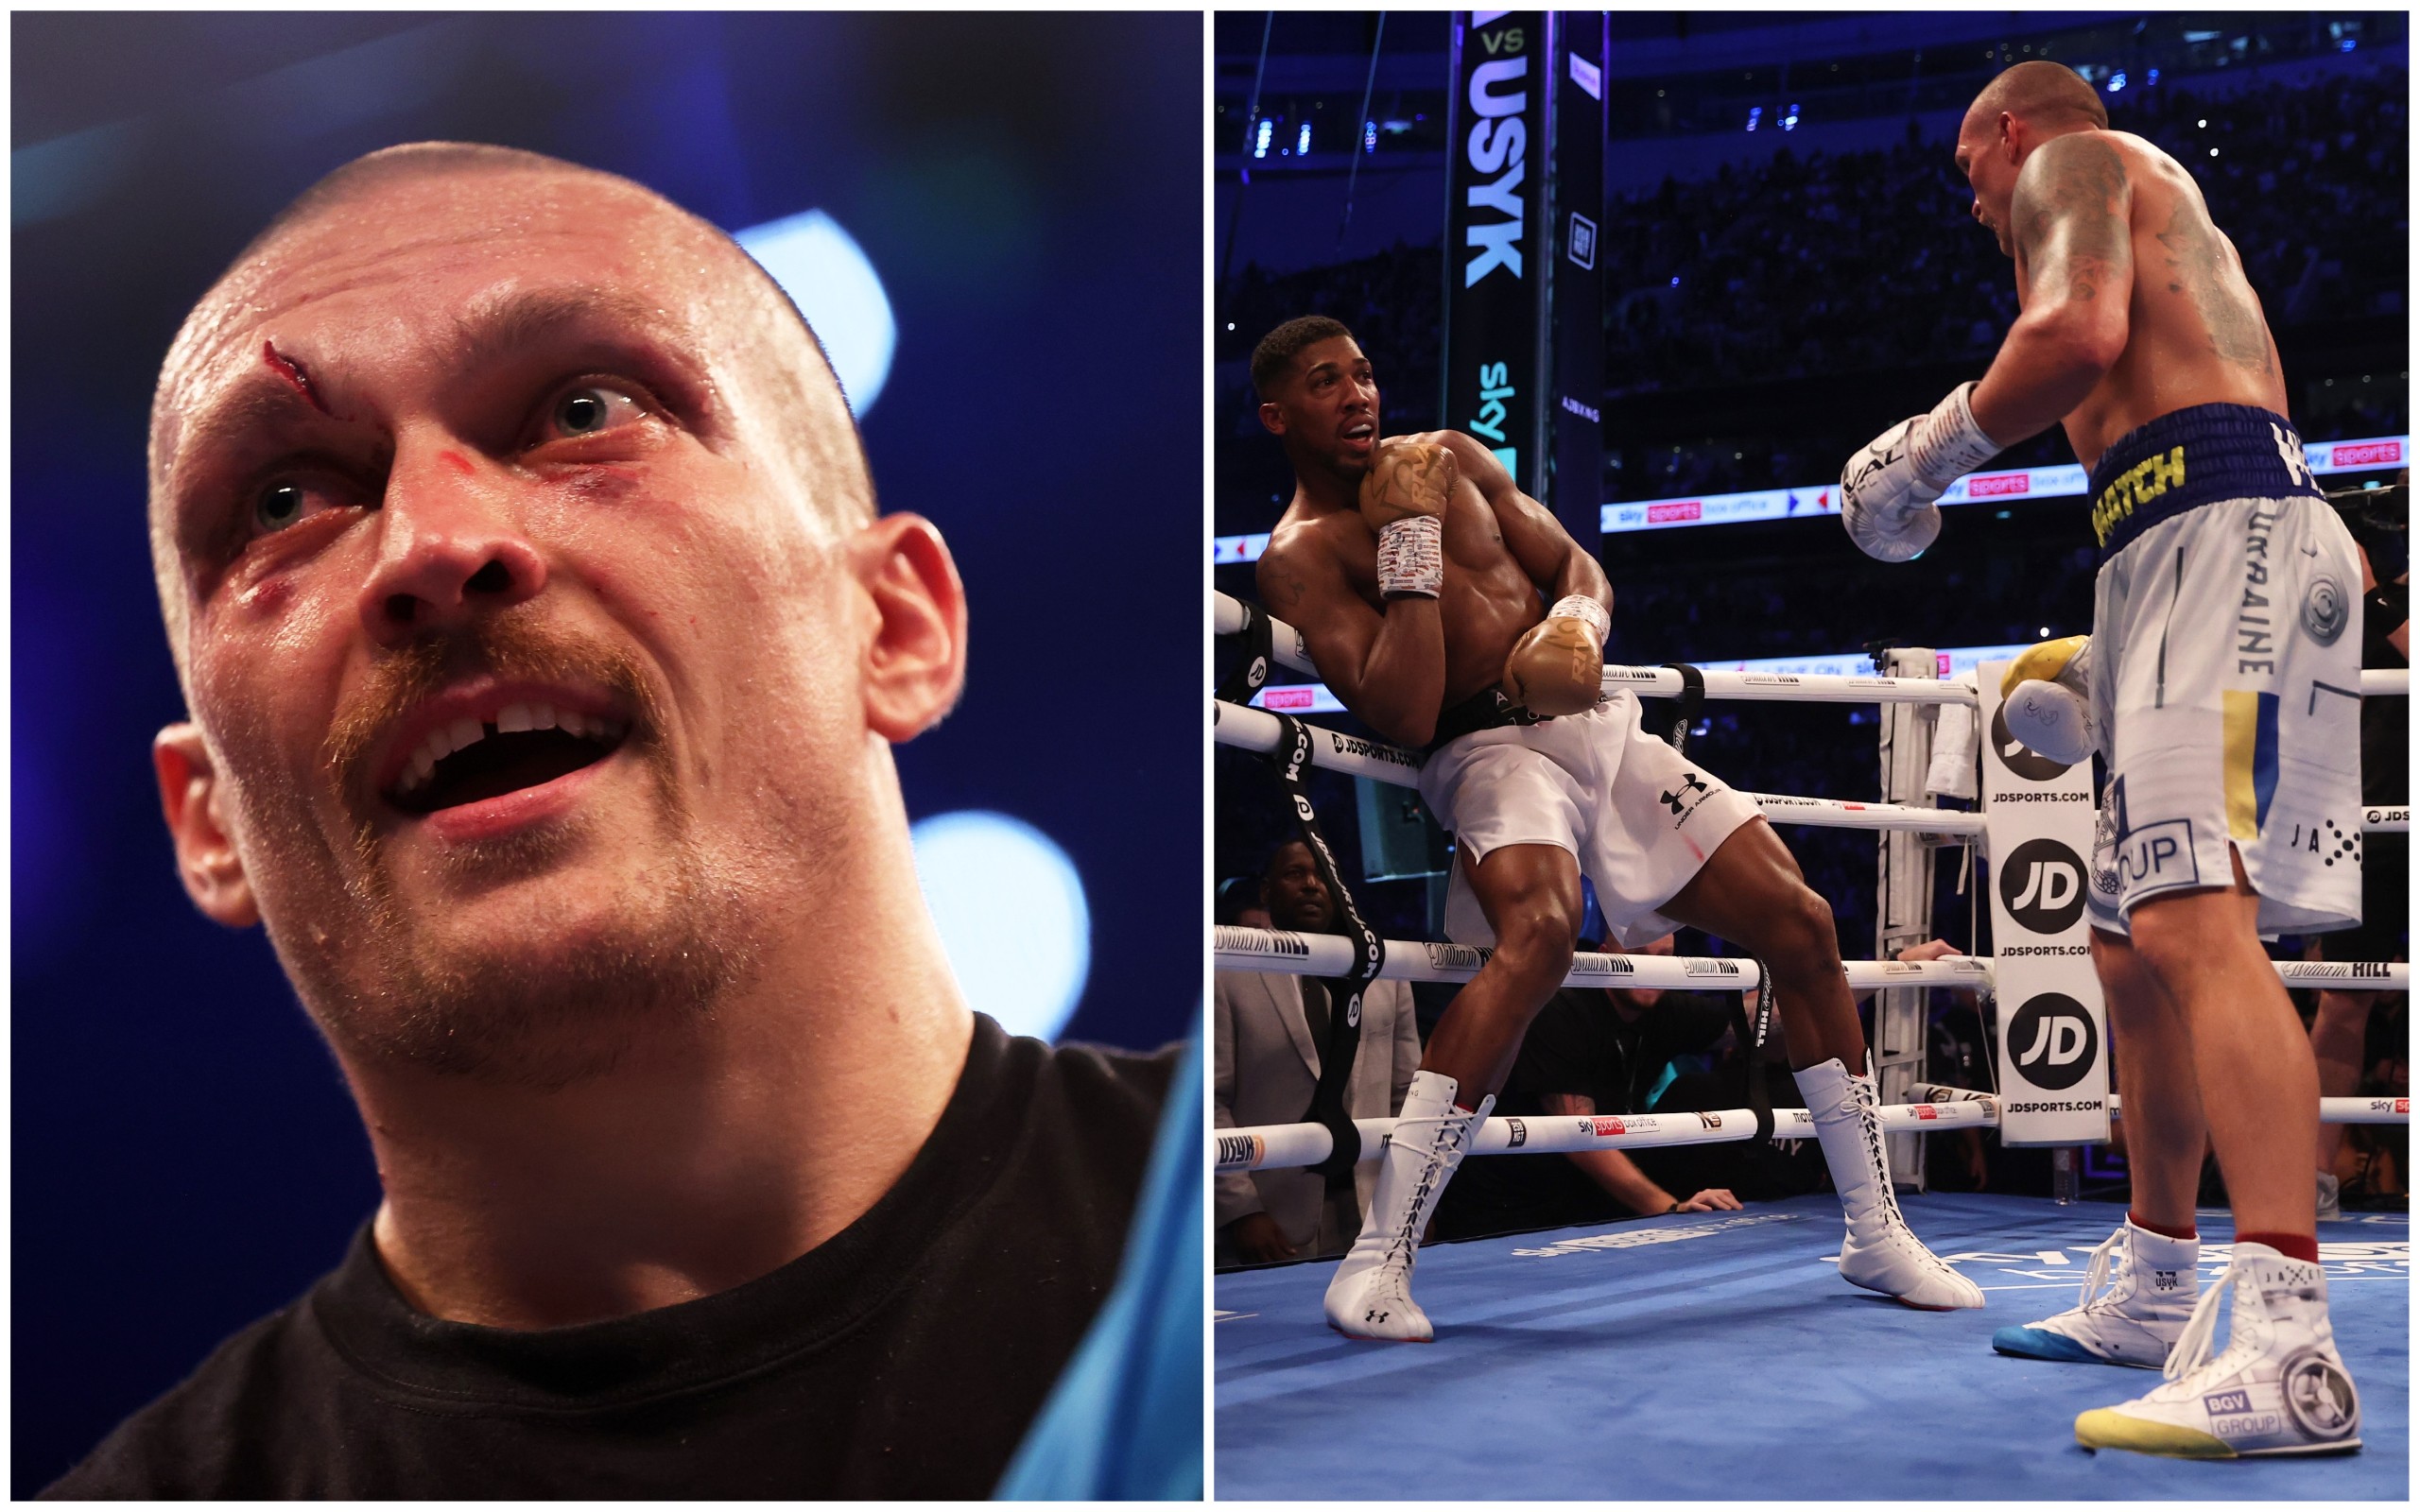 ‘Nothing special’ – Oleksandr Usyk reacts to Anthony Joshua performance after becoming new world champion